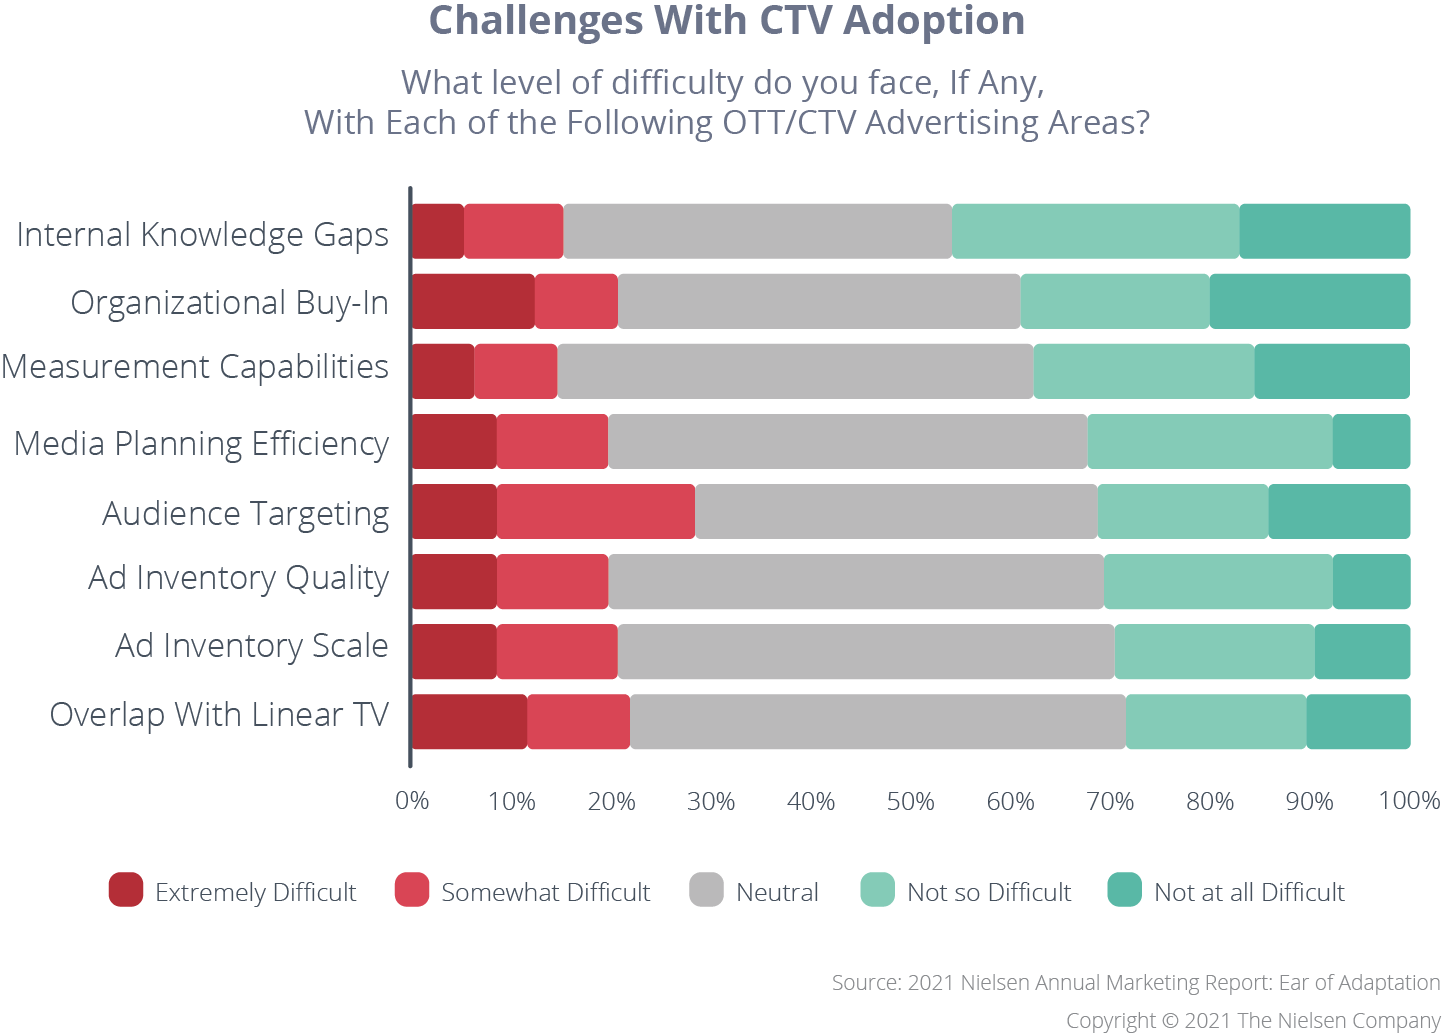 Challenges with CTV Adoption